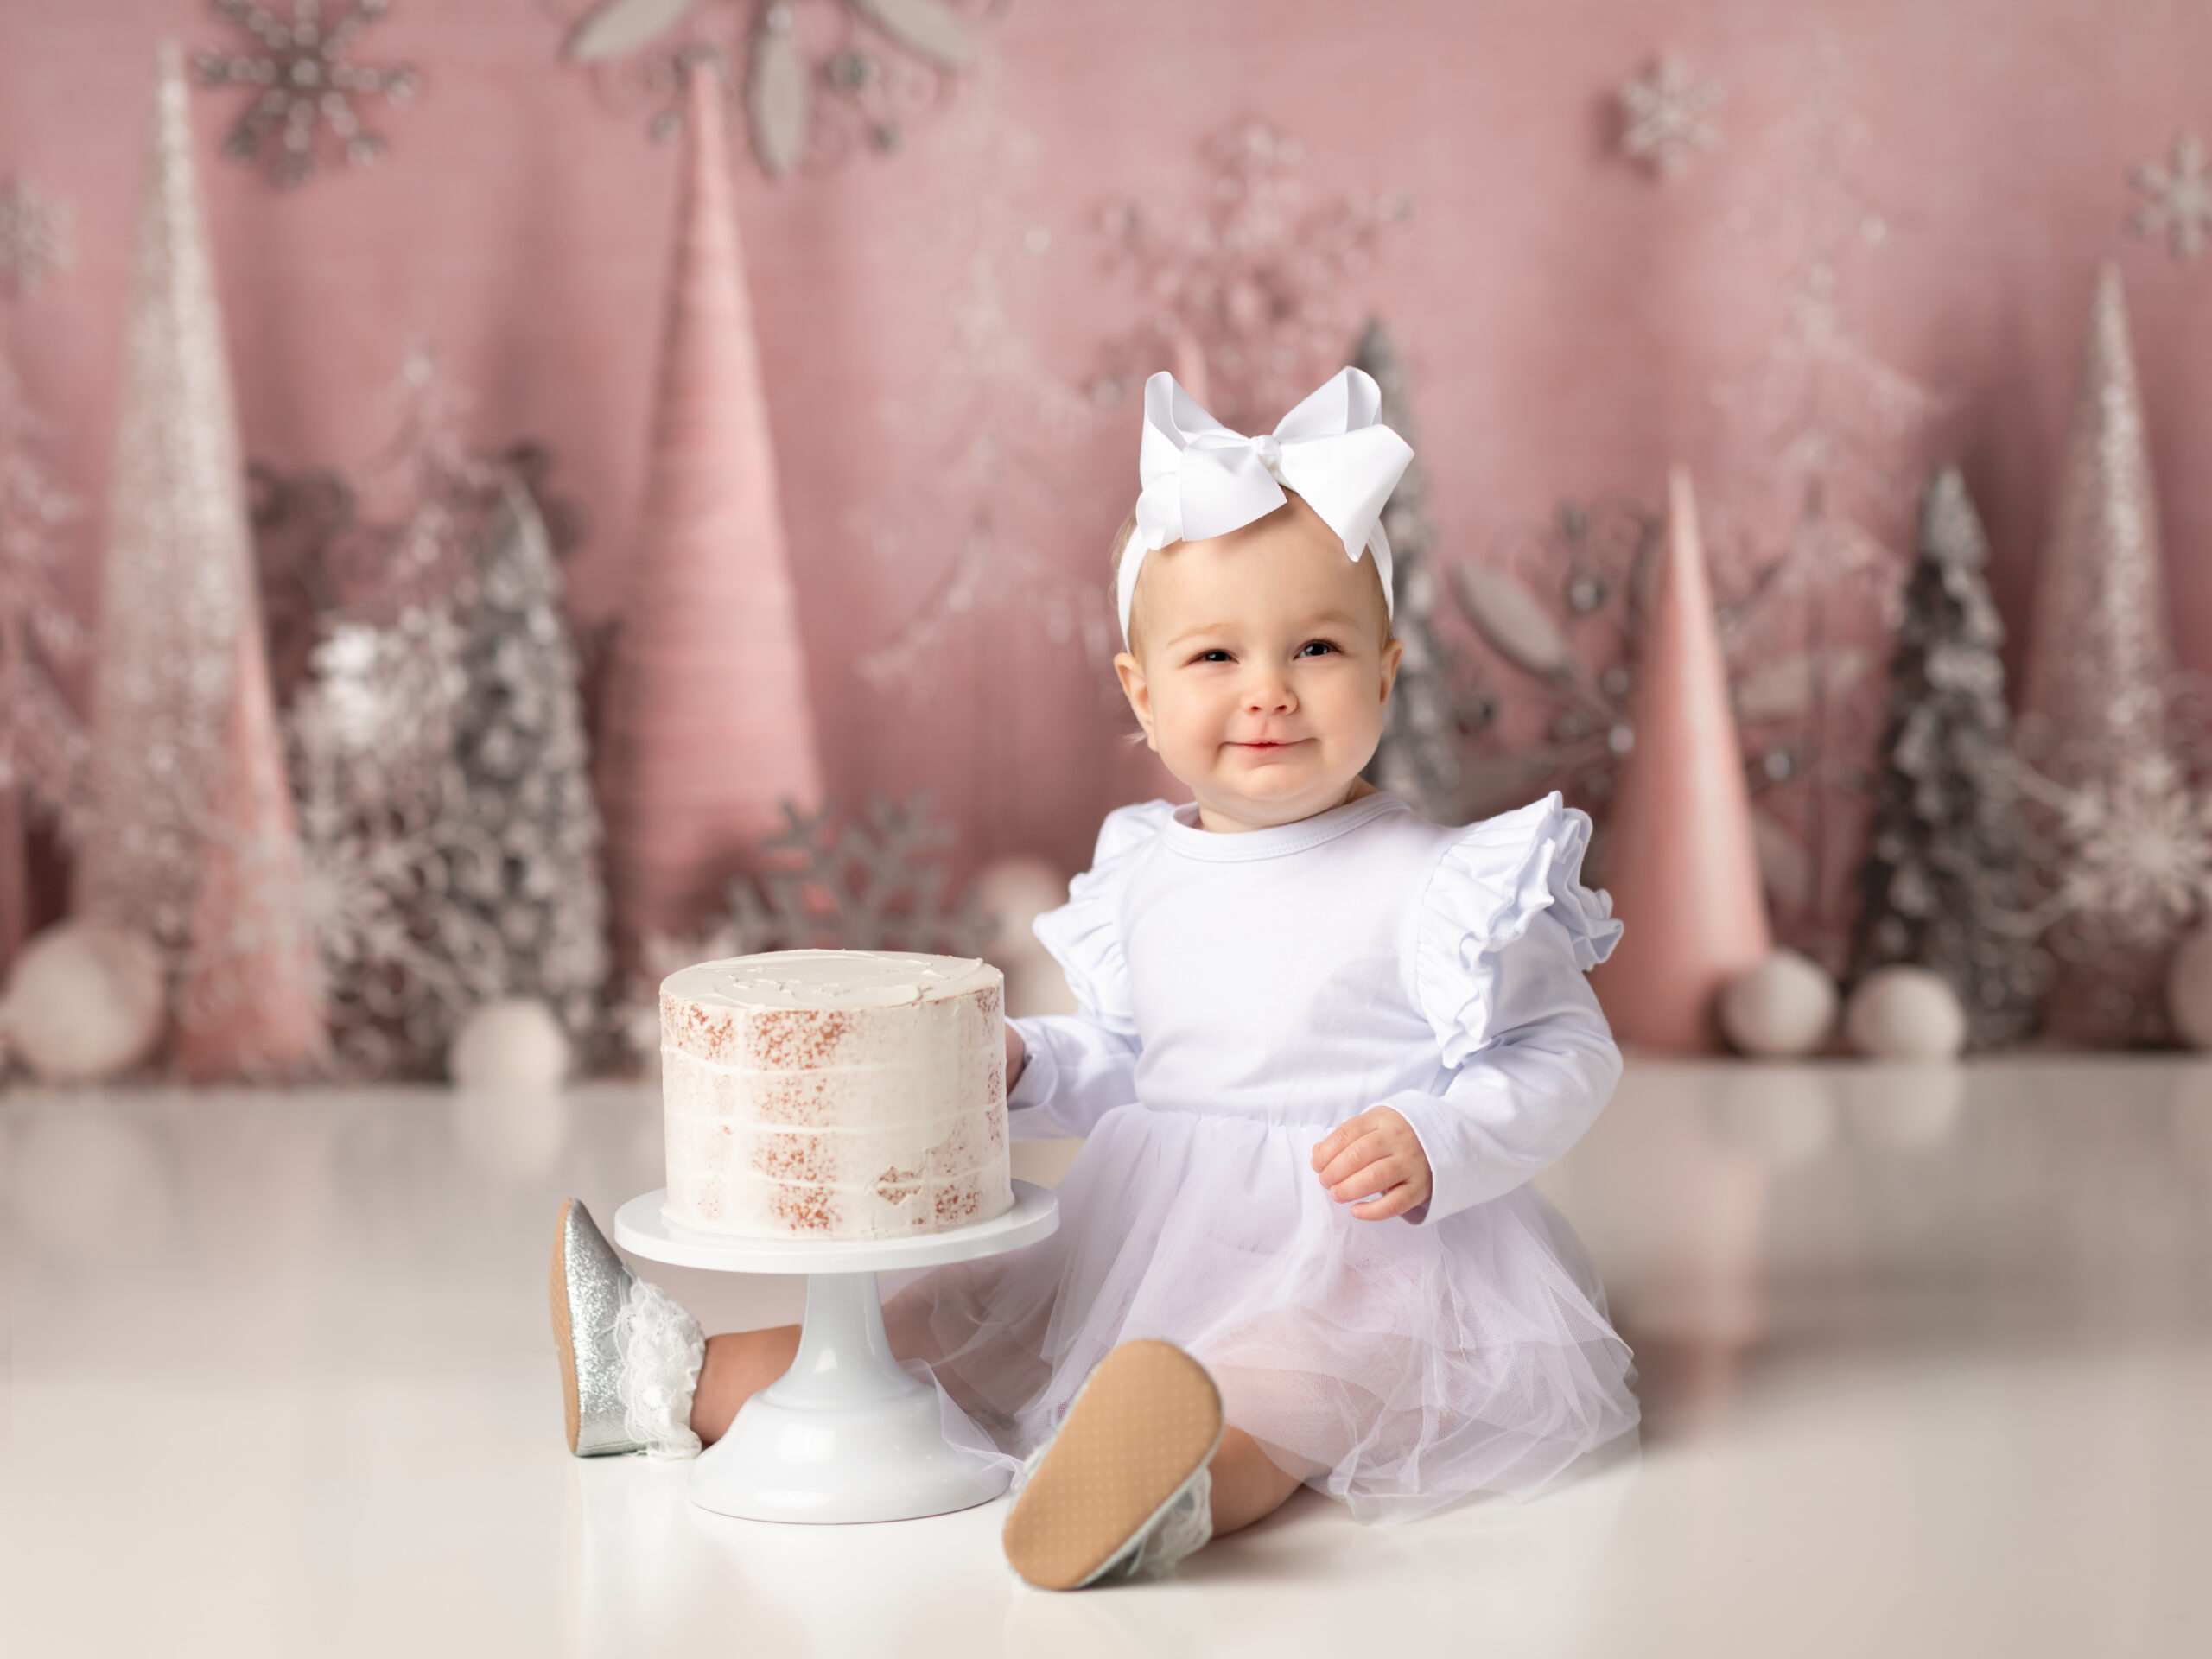 one year old girl in white dress posed for cake smash winter onederland birthday theme